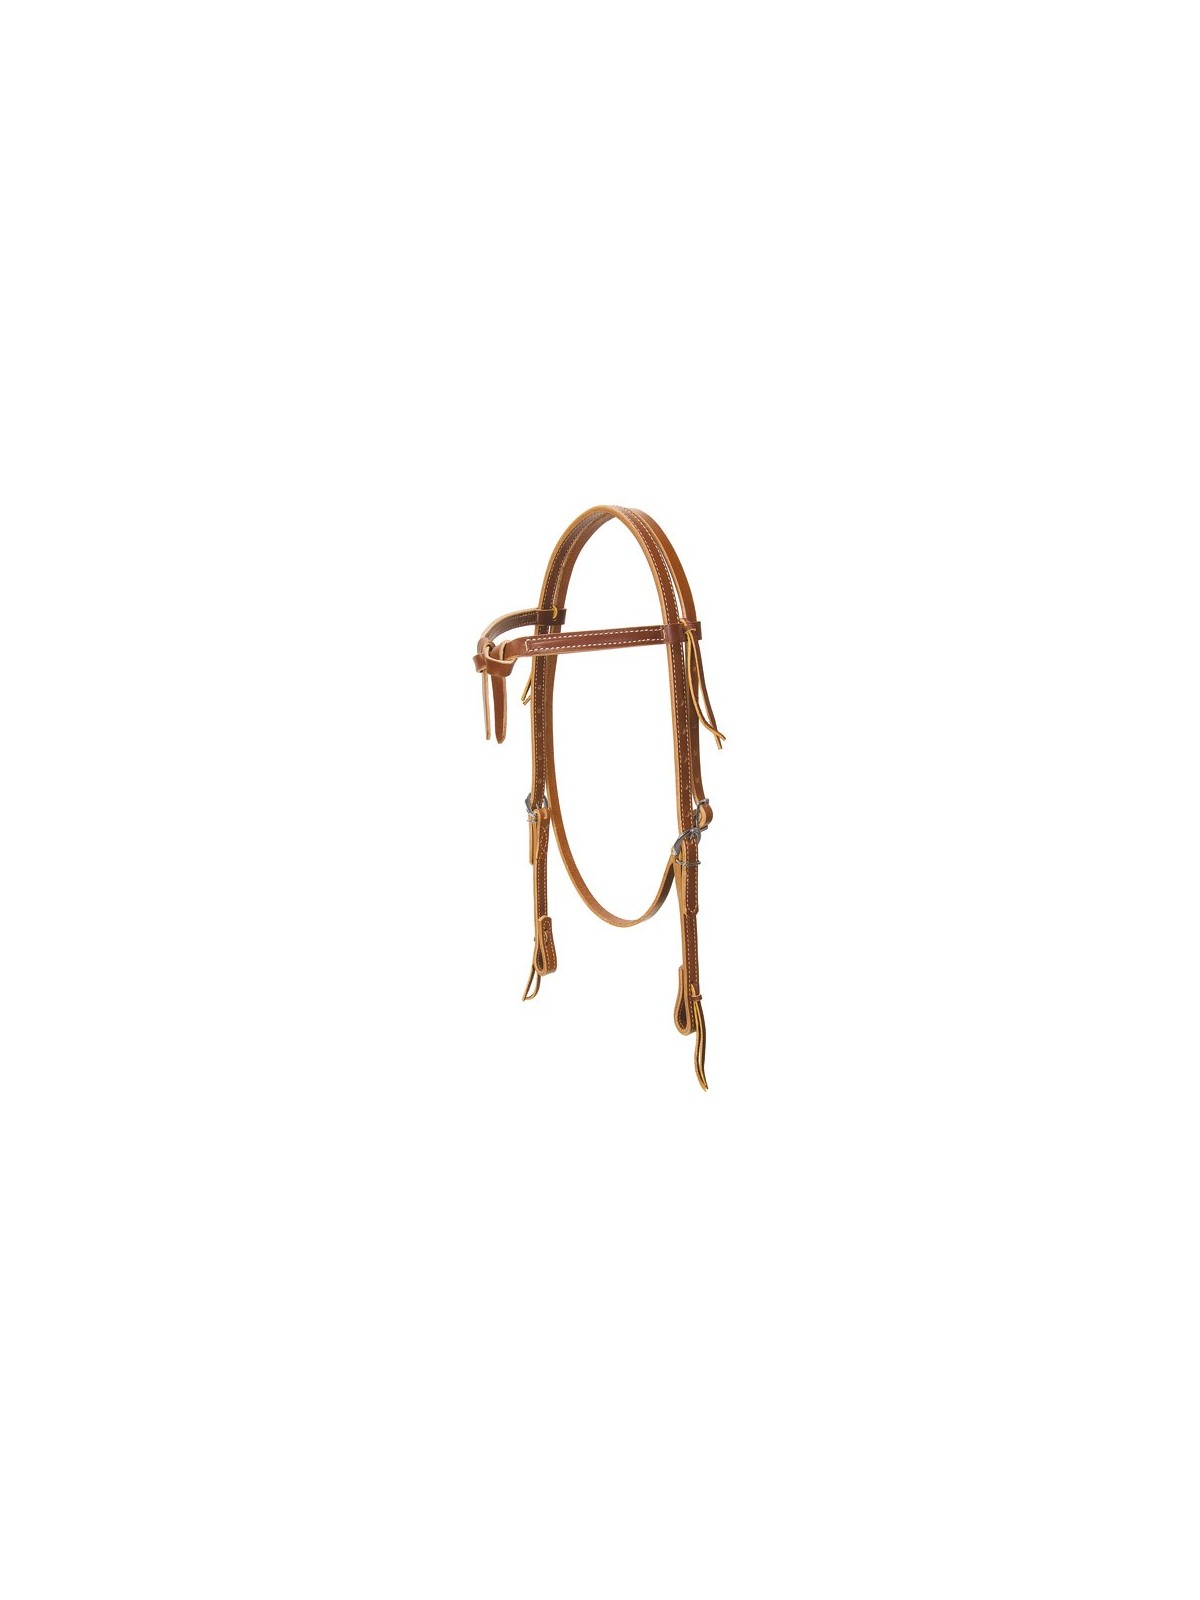 Deluxe Latigo Leather Knotted Headstall